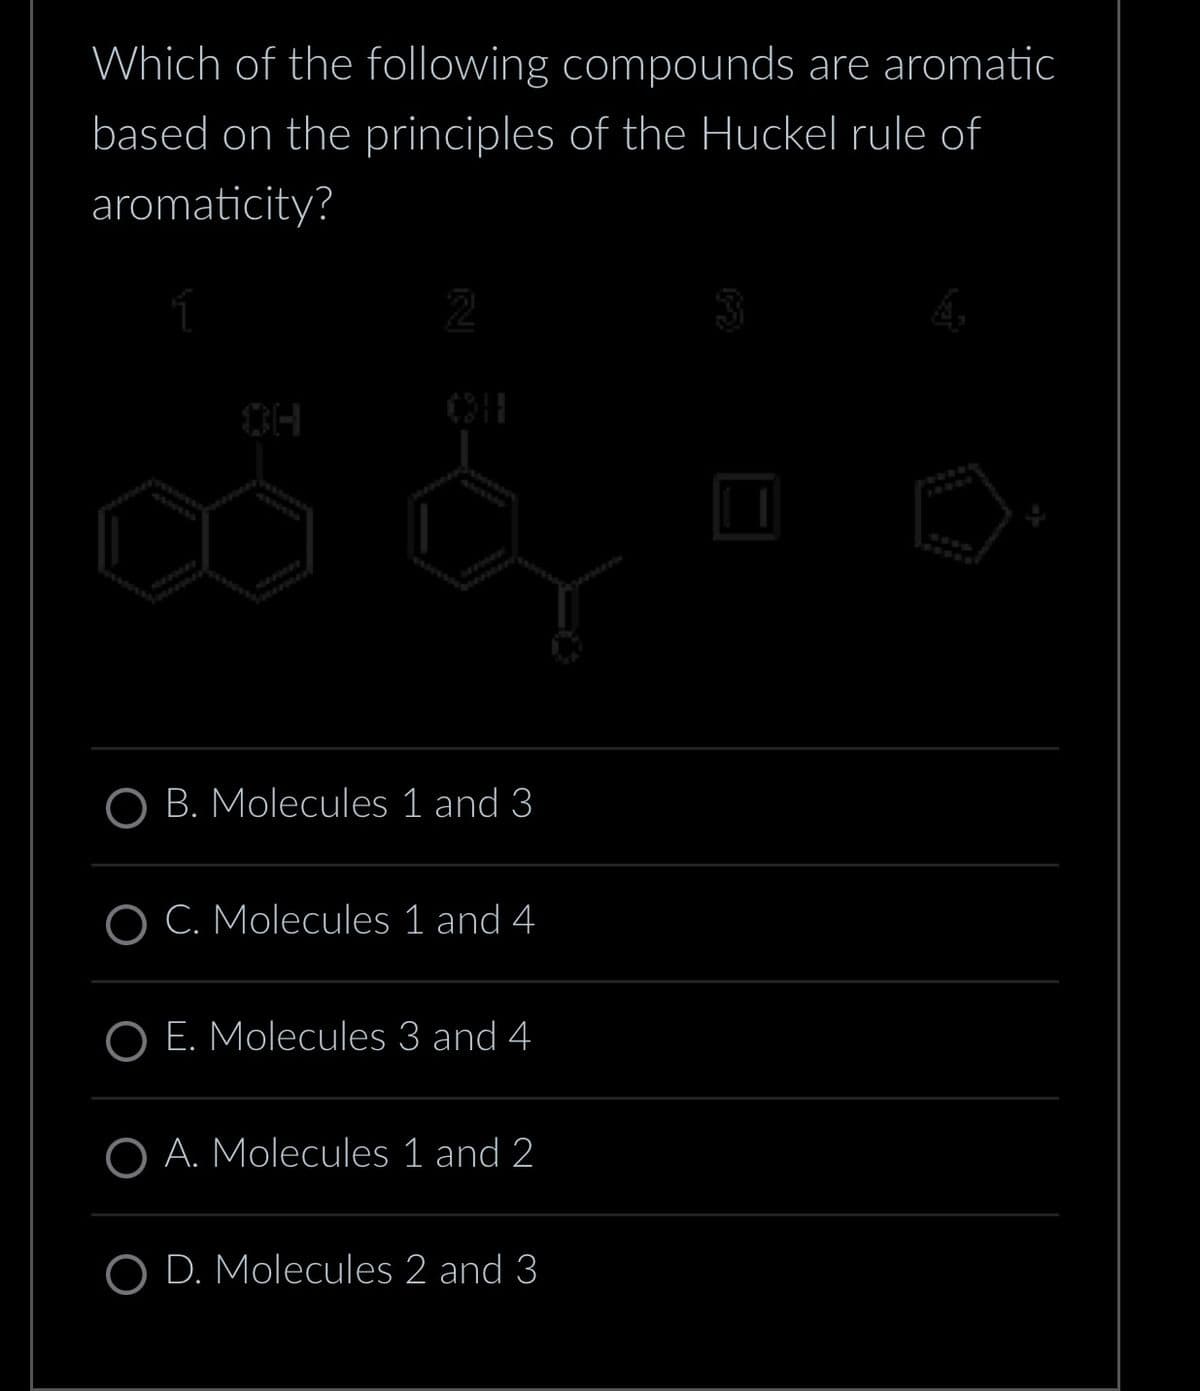 Which of the following compounds are aromatic
based on the principles of the Huckel rule of
aromaticity?
ssssss
OH
0211
6301500
C&
47
B. Molecules 1 and 3
OC. Molecules 1 and 4
E. Molecules 3 and 4
OA. Molecules 1 and 2
D. Molecules 2 and 3
wwwww